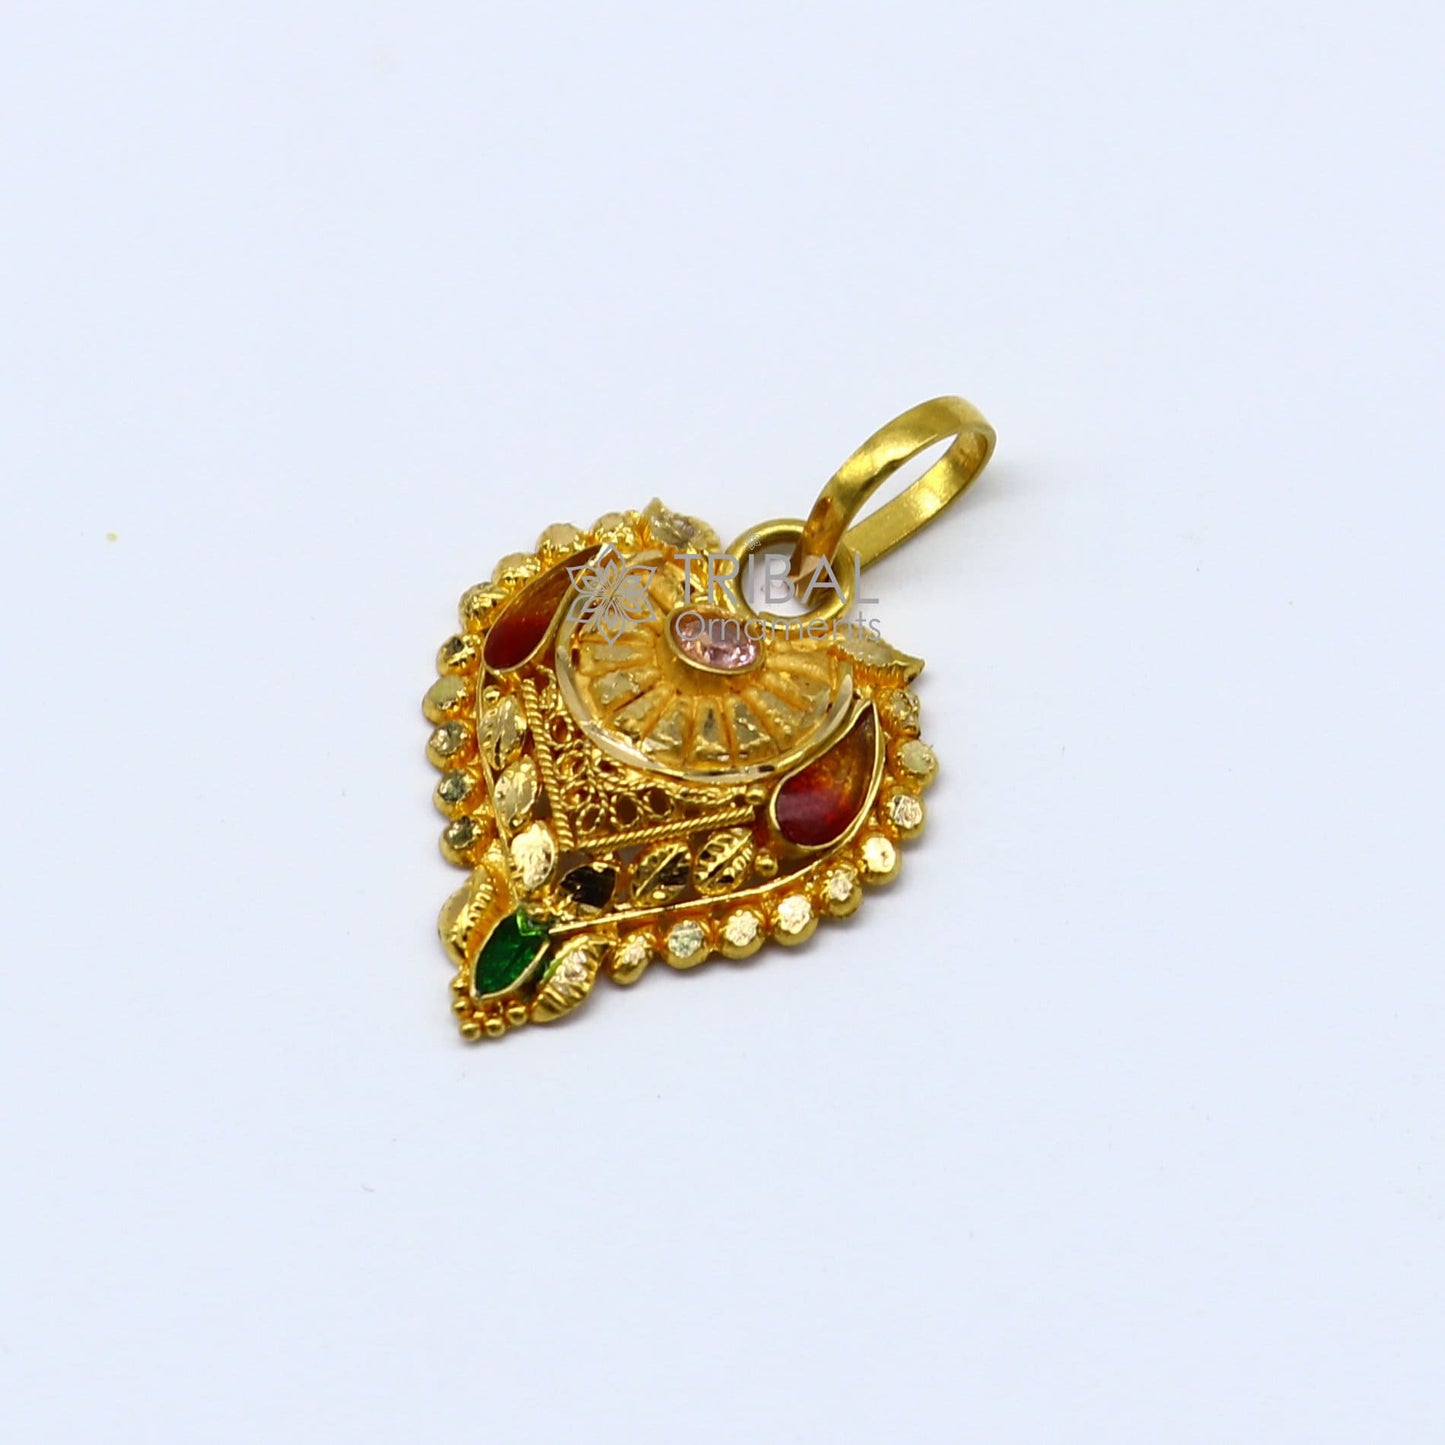 Traditional cultural filigree work trendy 22kt yellow gold functional pendant, amazing ethnic brides pendant jewelry gp29 - TRIBAL ORNAMENTS